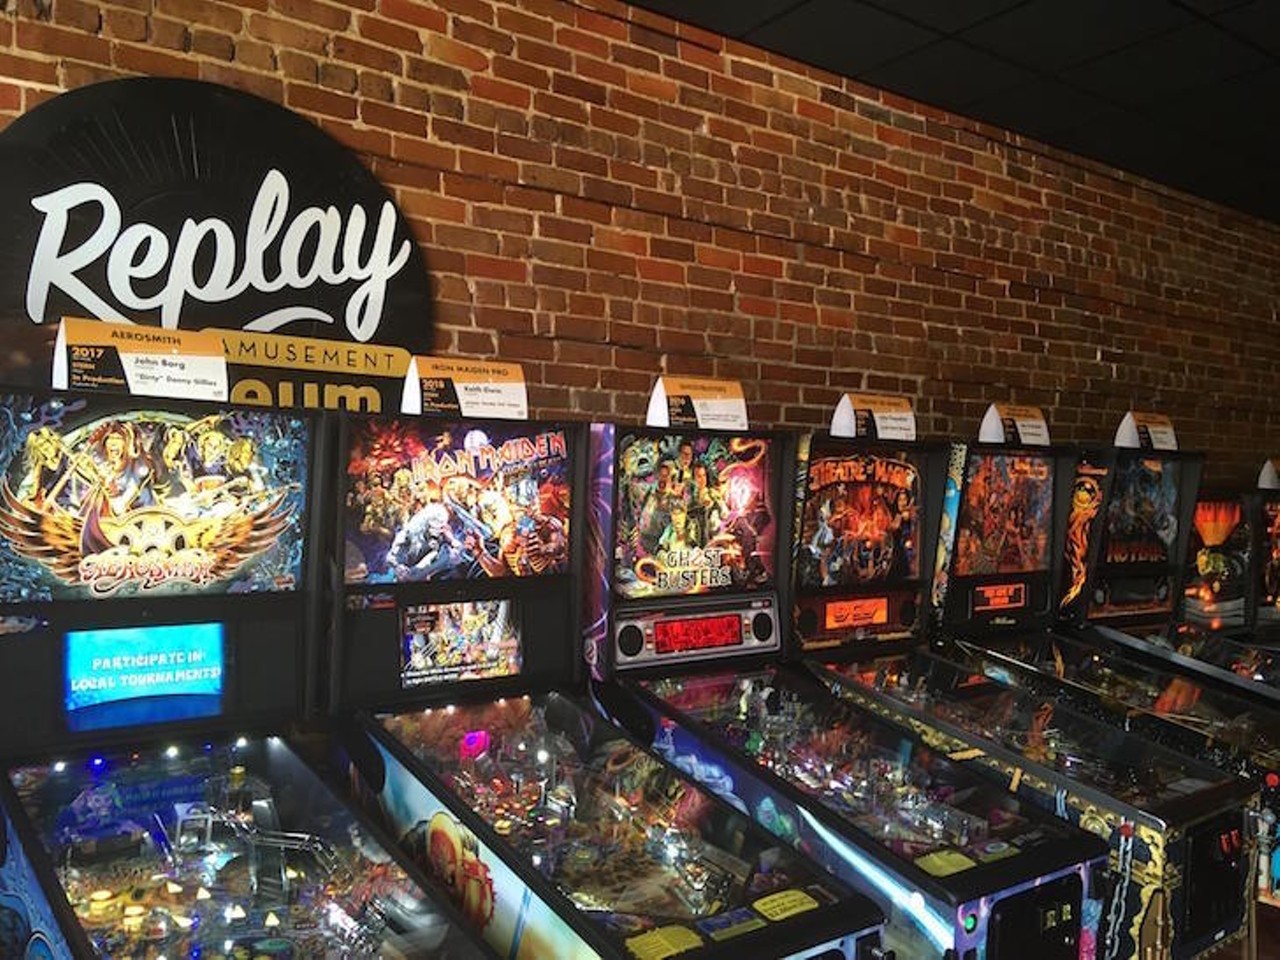 Replay Museum
Estimated time: 45 minutes      
A whimsical, interactive museum filled with over 100 old pinball machines and vintage video games located in the heart of downtown Tarpon Springs. Whether you&#146;re 6 or you&#146;re 60 you&#146;ll find a colorful, hunking piece of old technology to play with. Immerse yourself in some fun 80&#146;s tackiness. 
Photo via Replay Museum/Facebook